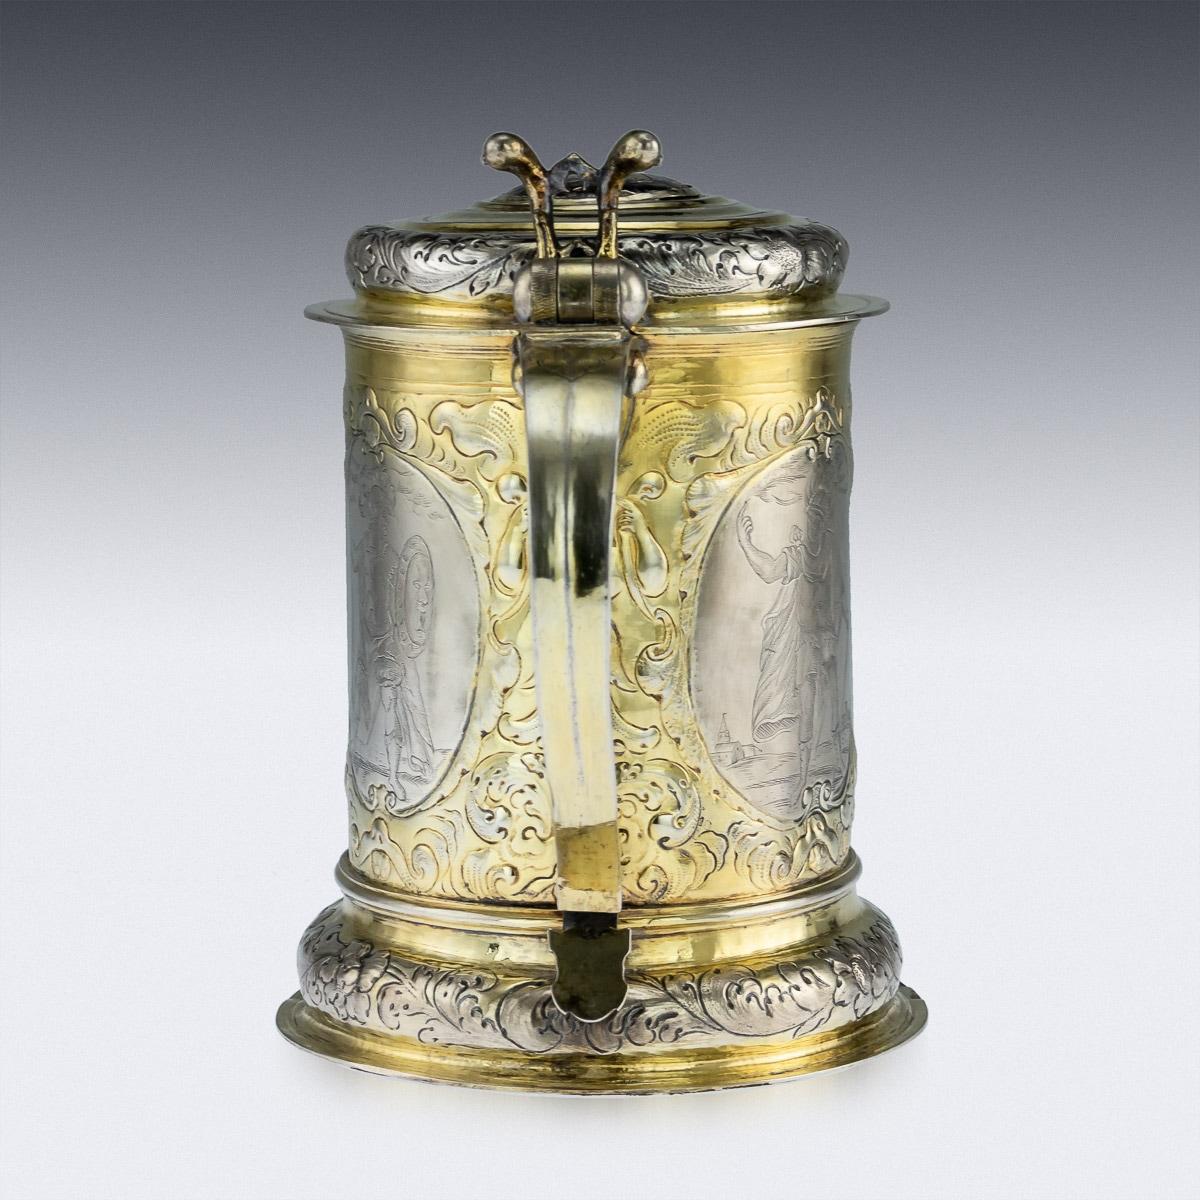 Antique mid-18th century Imperial Russian solid silver-gilt and niello impressive lidded tankard, parcel gilt, of traditional tapering form on a spreading foot, the sides chased with gilt putto masks and trailing foliage and scrolls on textured